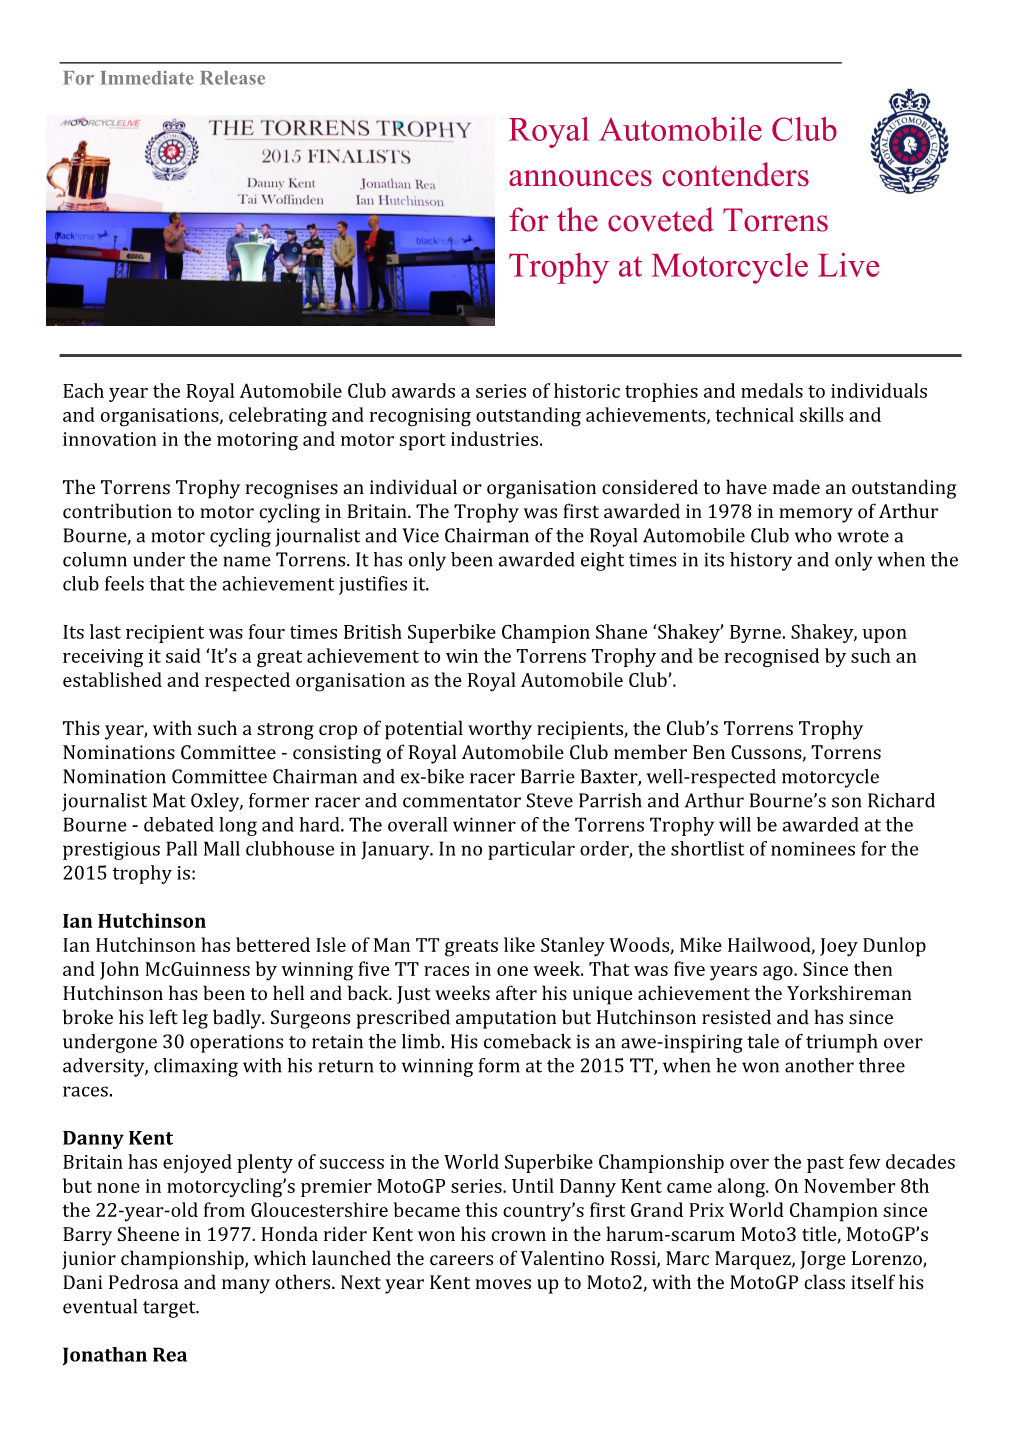 Royal Automobile Club Announces Contenders for the Coveted Torrens Trophy at Motorcycle Live